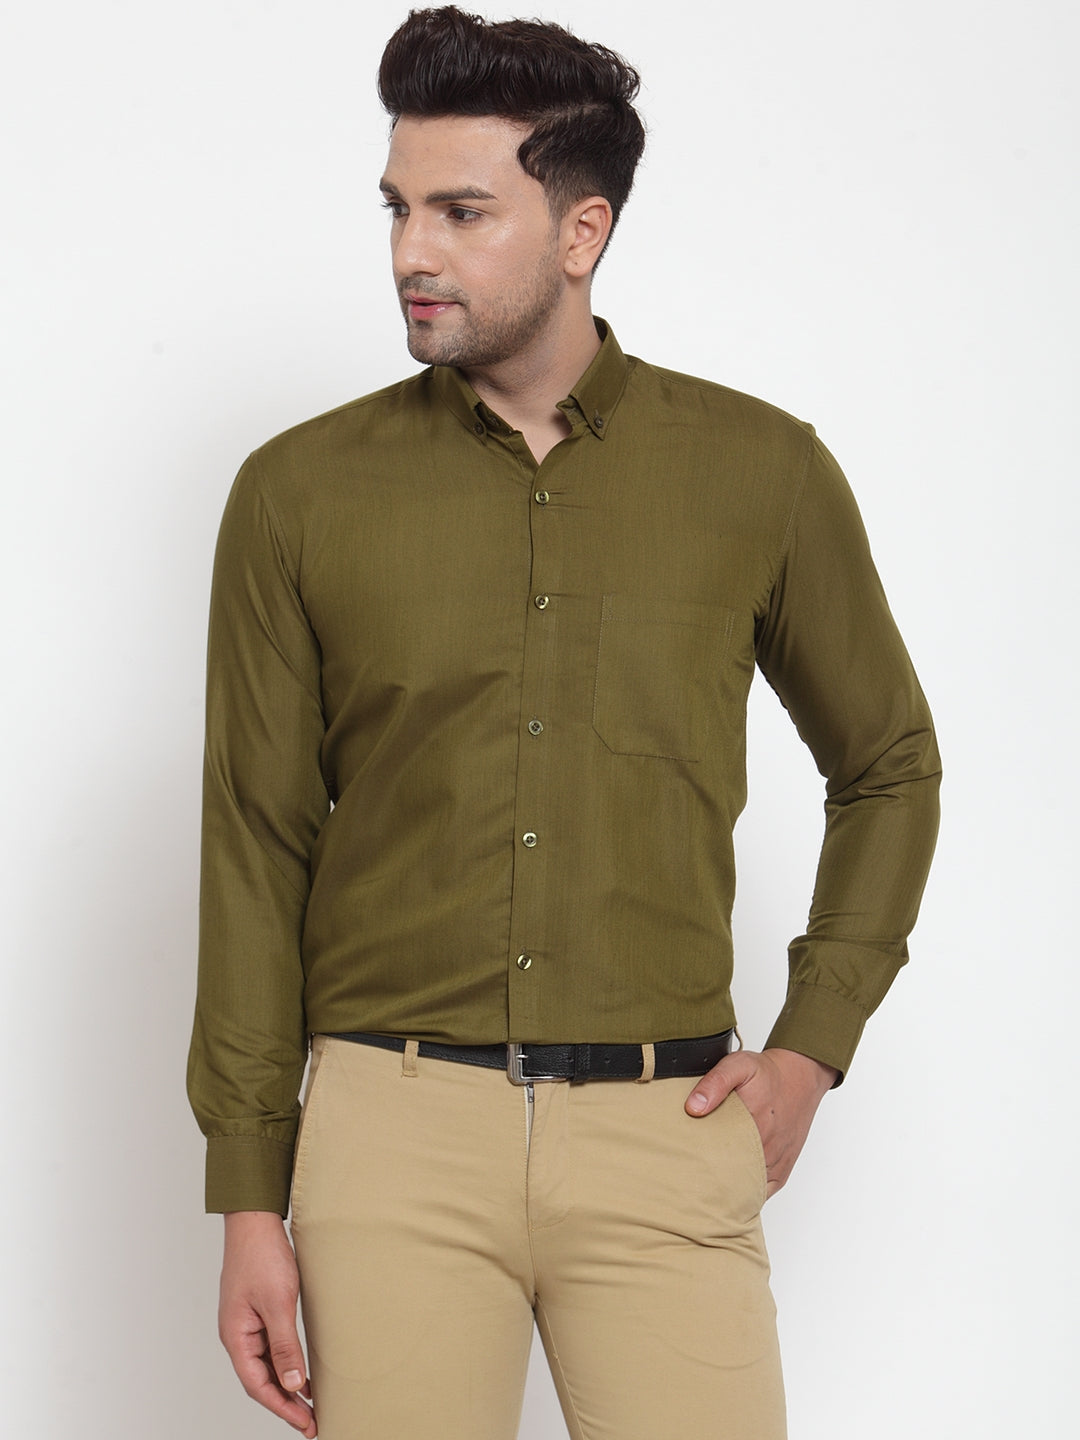 Men's Green Cotton Solid Button Down Formal Shirts ( SF 713Olive ) - Jainish